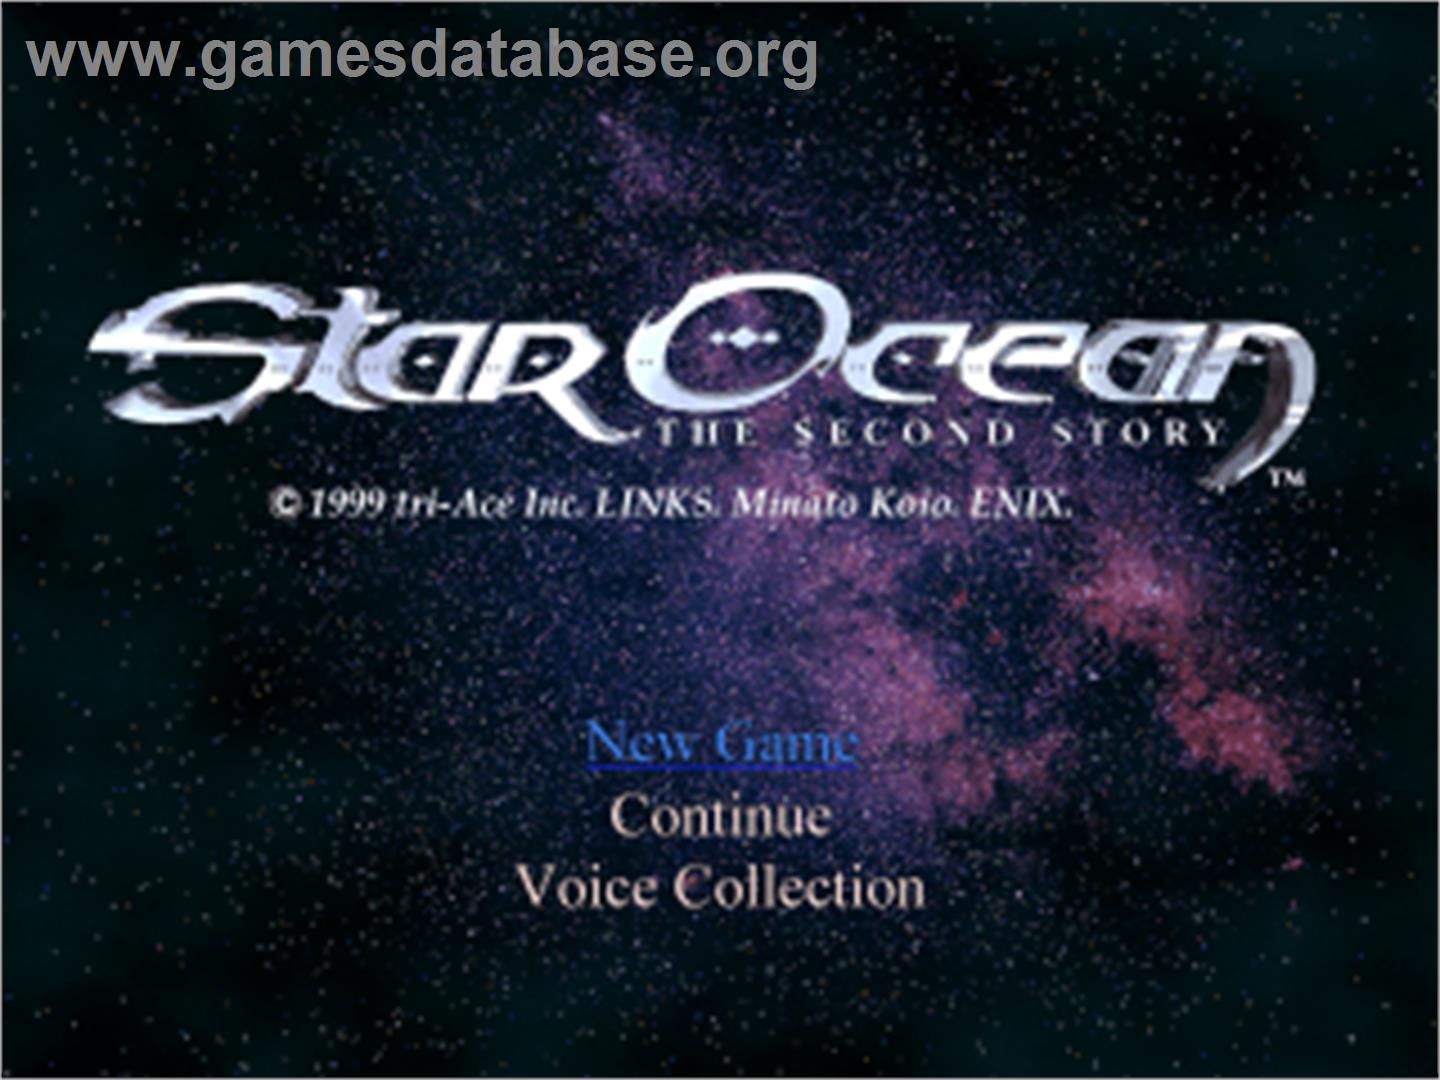 Star Ocean: The Second Story - Sony Playstation - Artwork - Title Screen